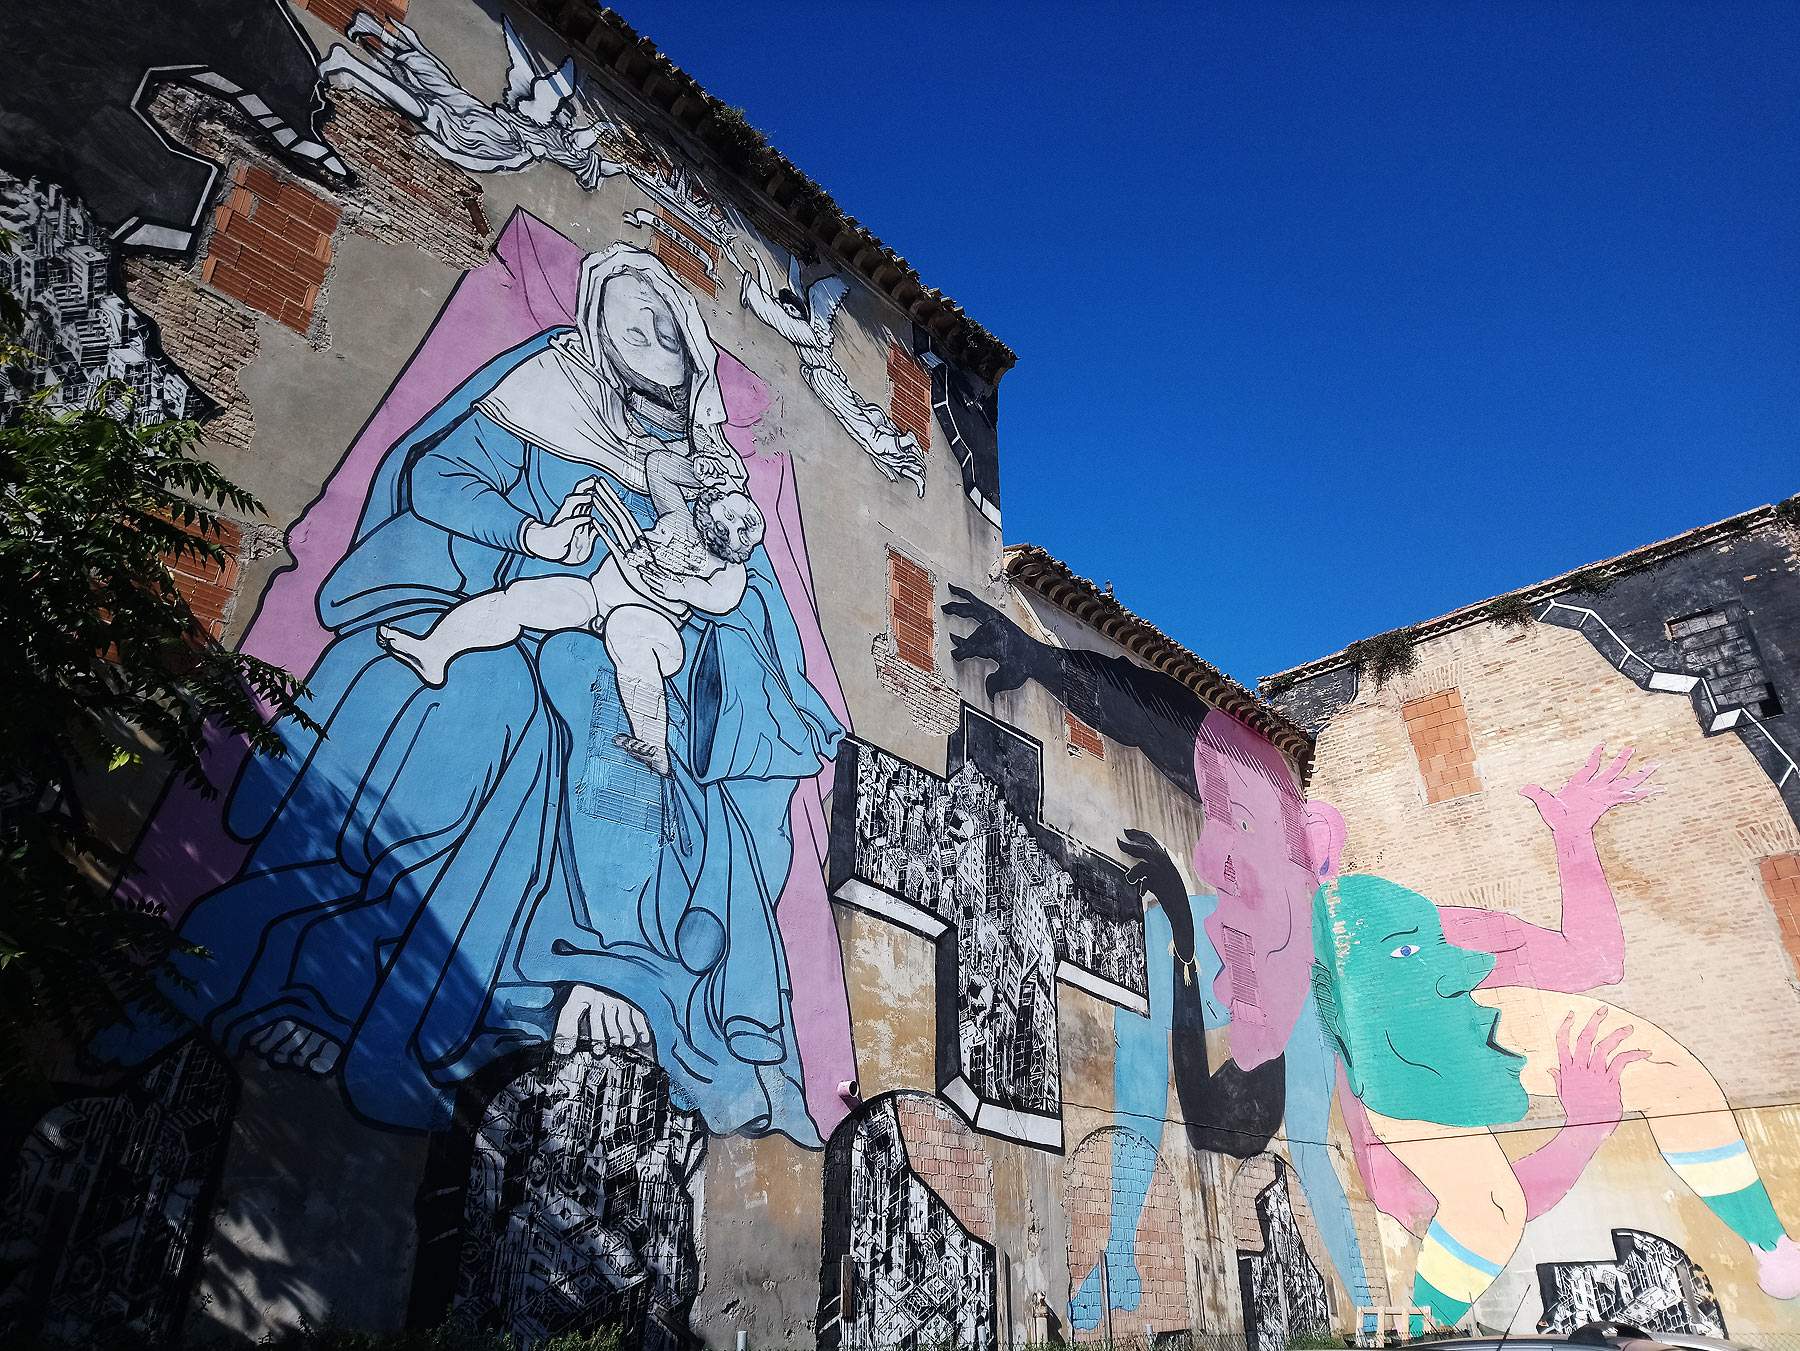 MiBACT will publish the first map of street art works in Italy